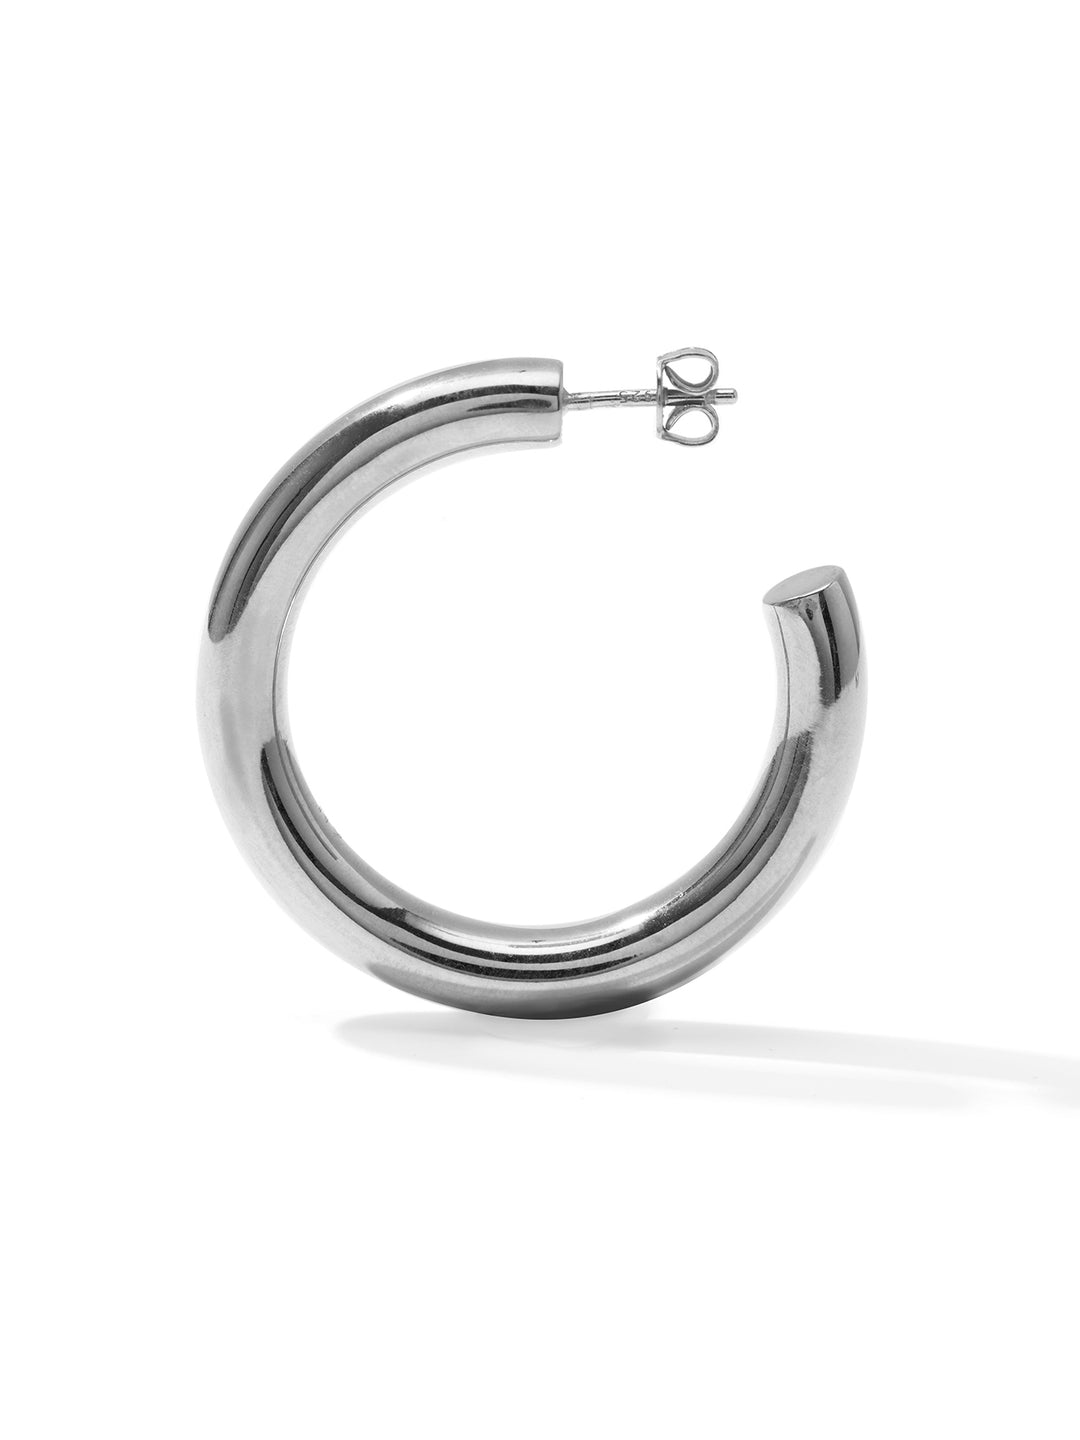 STAPLE Hoops Large • Color: White Gold